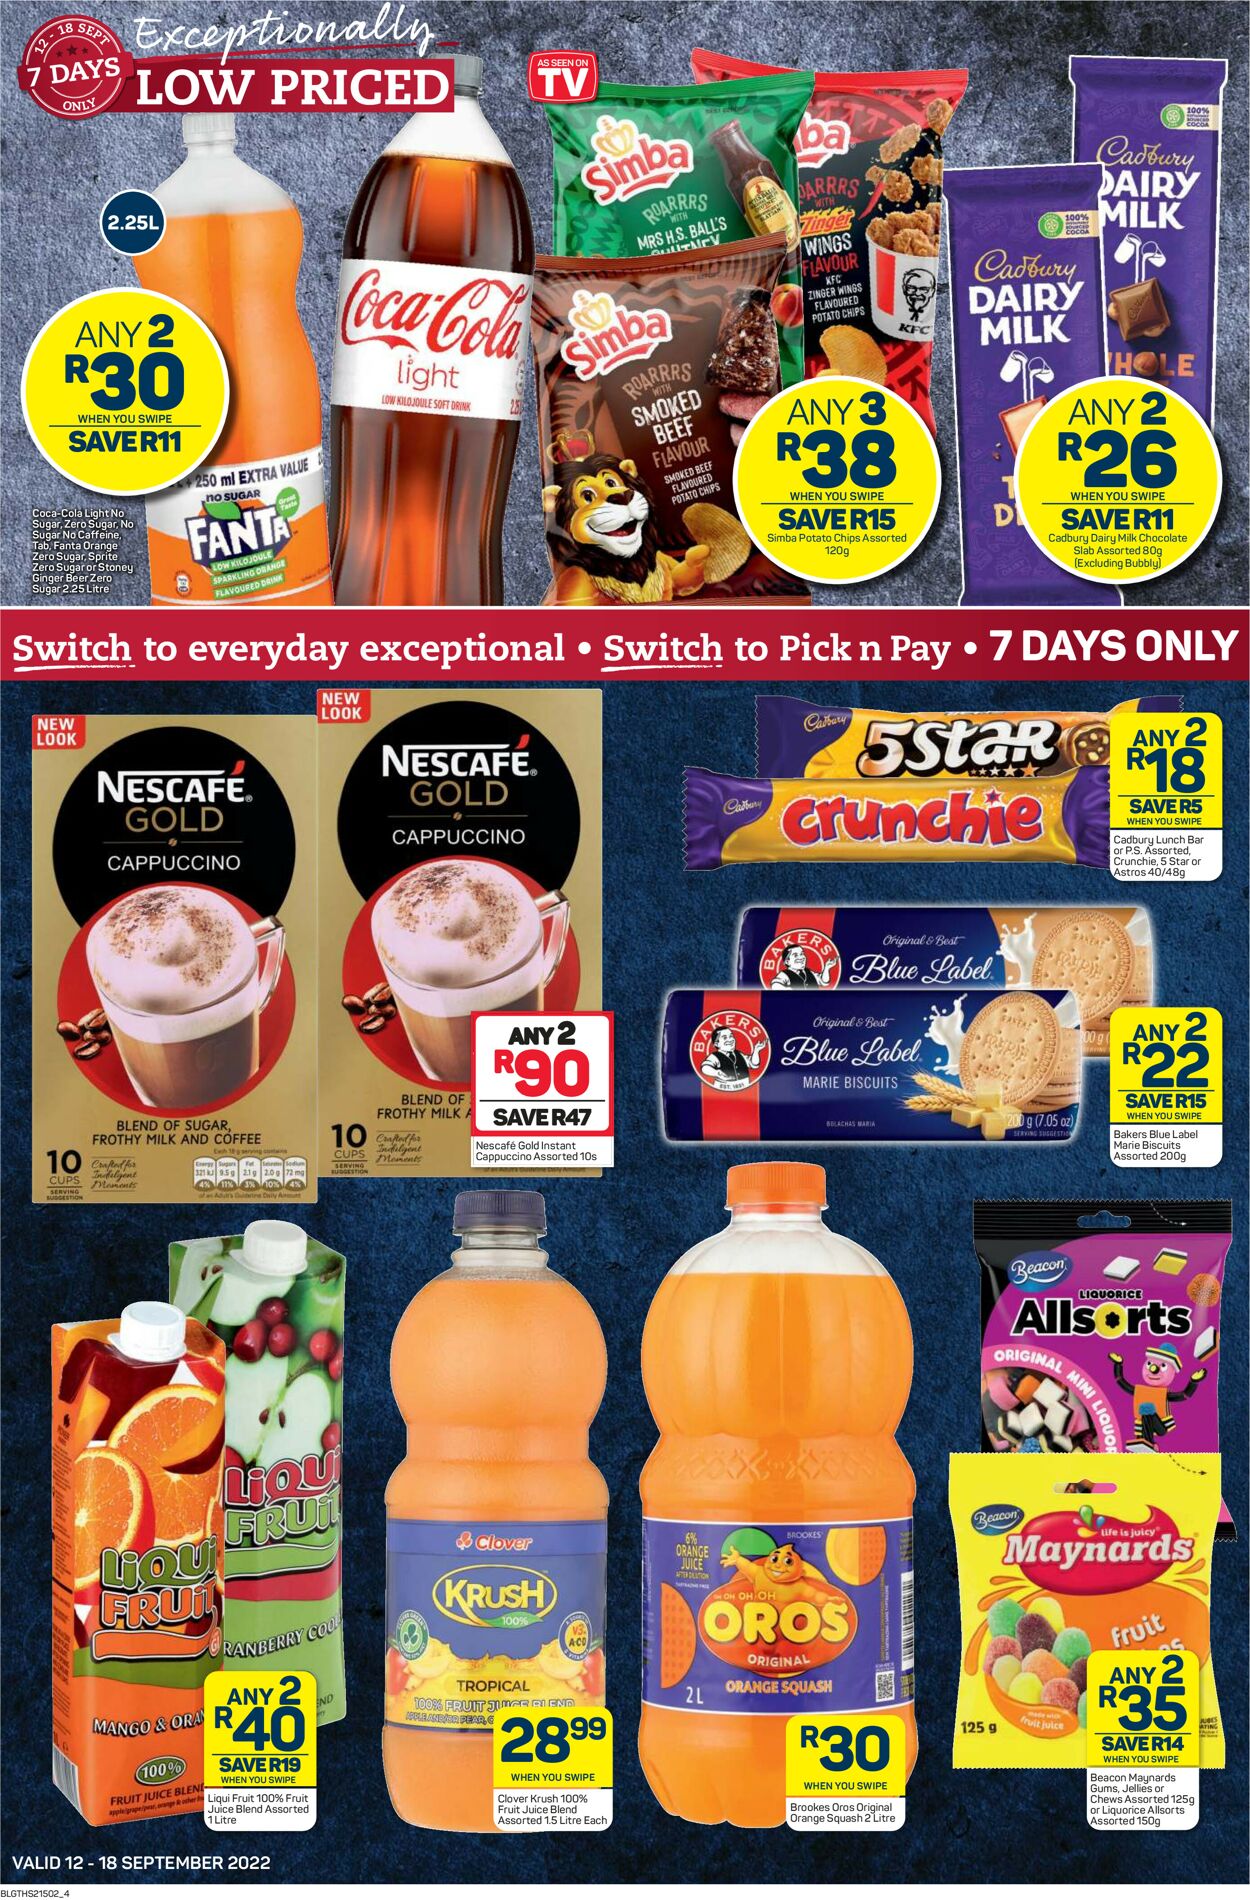 Pick n Pay Catalogue - 2022/09/12-2022/09/18 (Page 4)